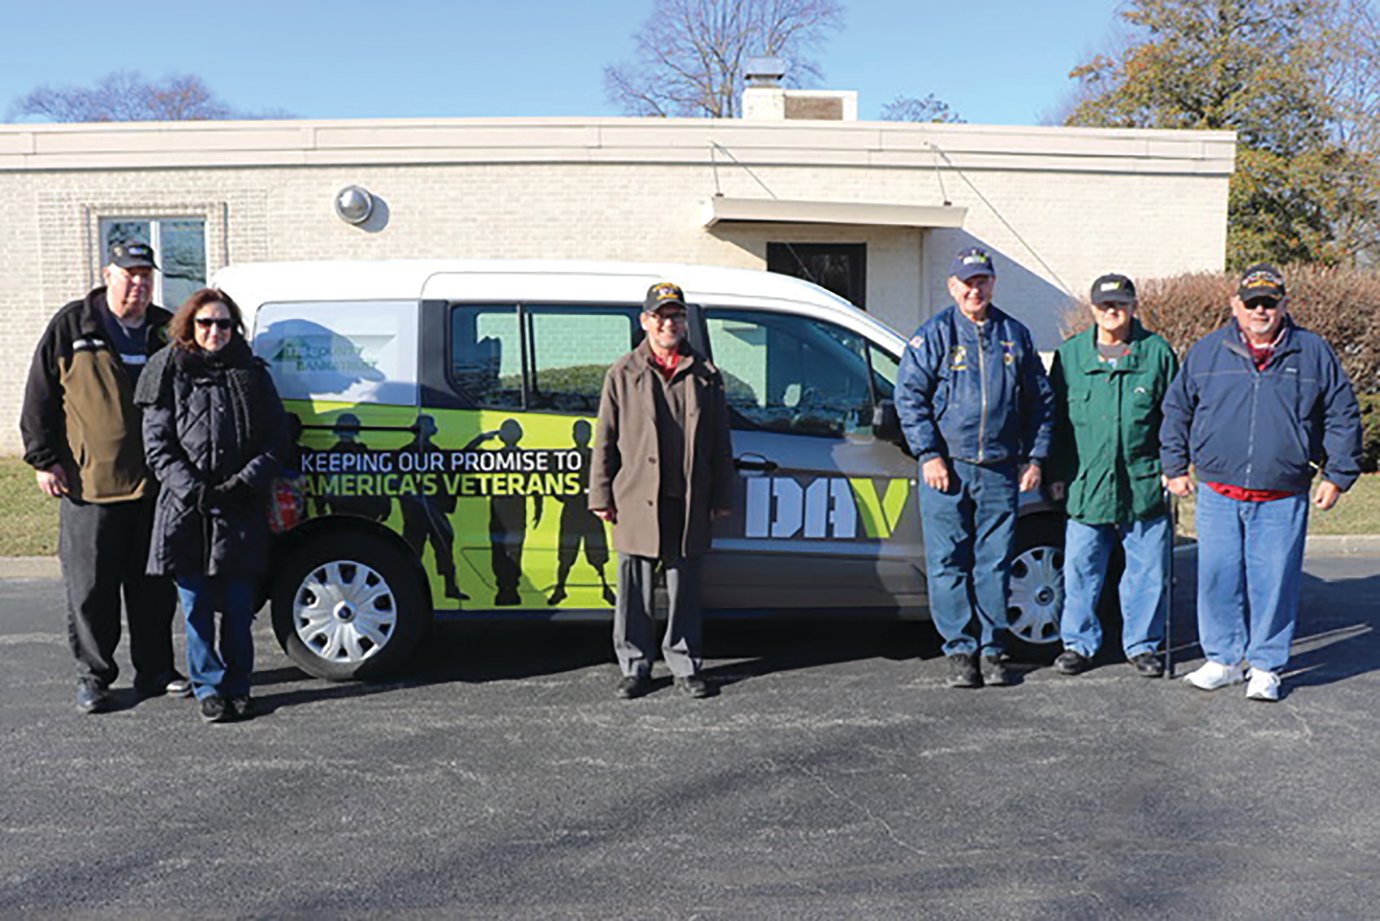 Veterans Service Officer of Montgomery County Joe Ellis, right, proudly accepts a new transport van destined to serve veterans in the county. The purchase was made possible by donations from Disabled American Veterans, Tri County Bank and Trust and Hoosier Heartland State Bank, as well as a grant from the Montgomery County Community Foundation.